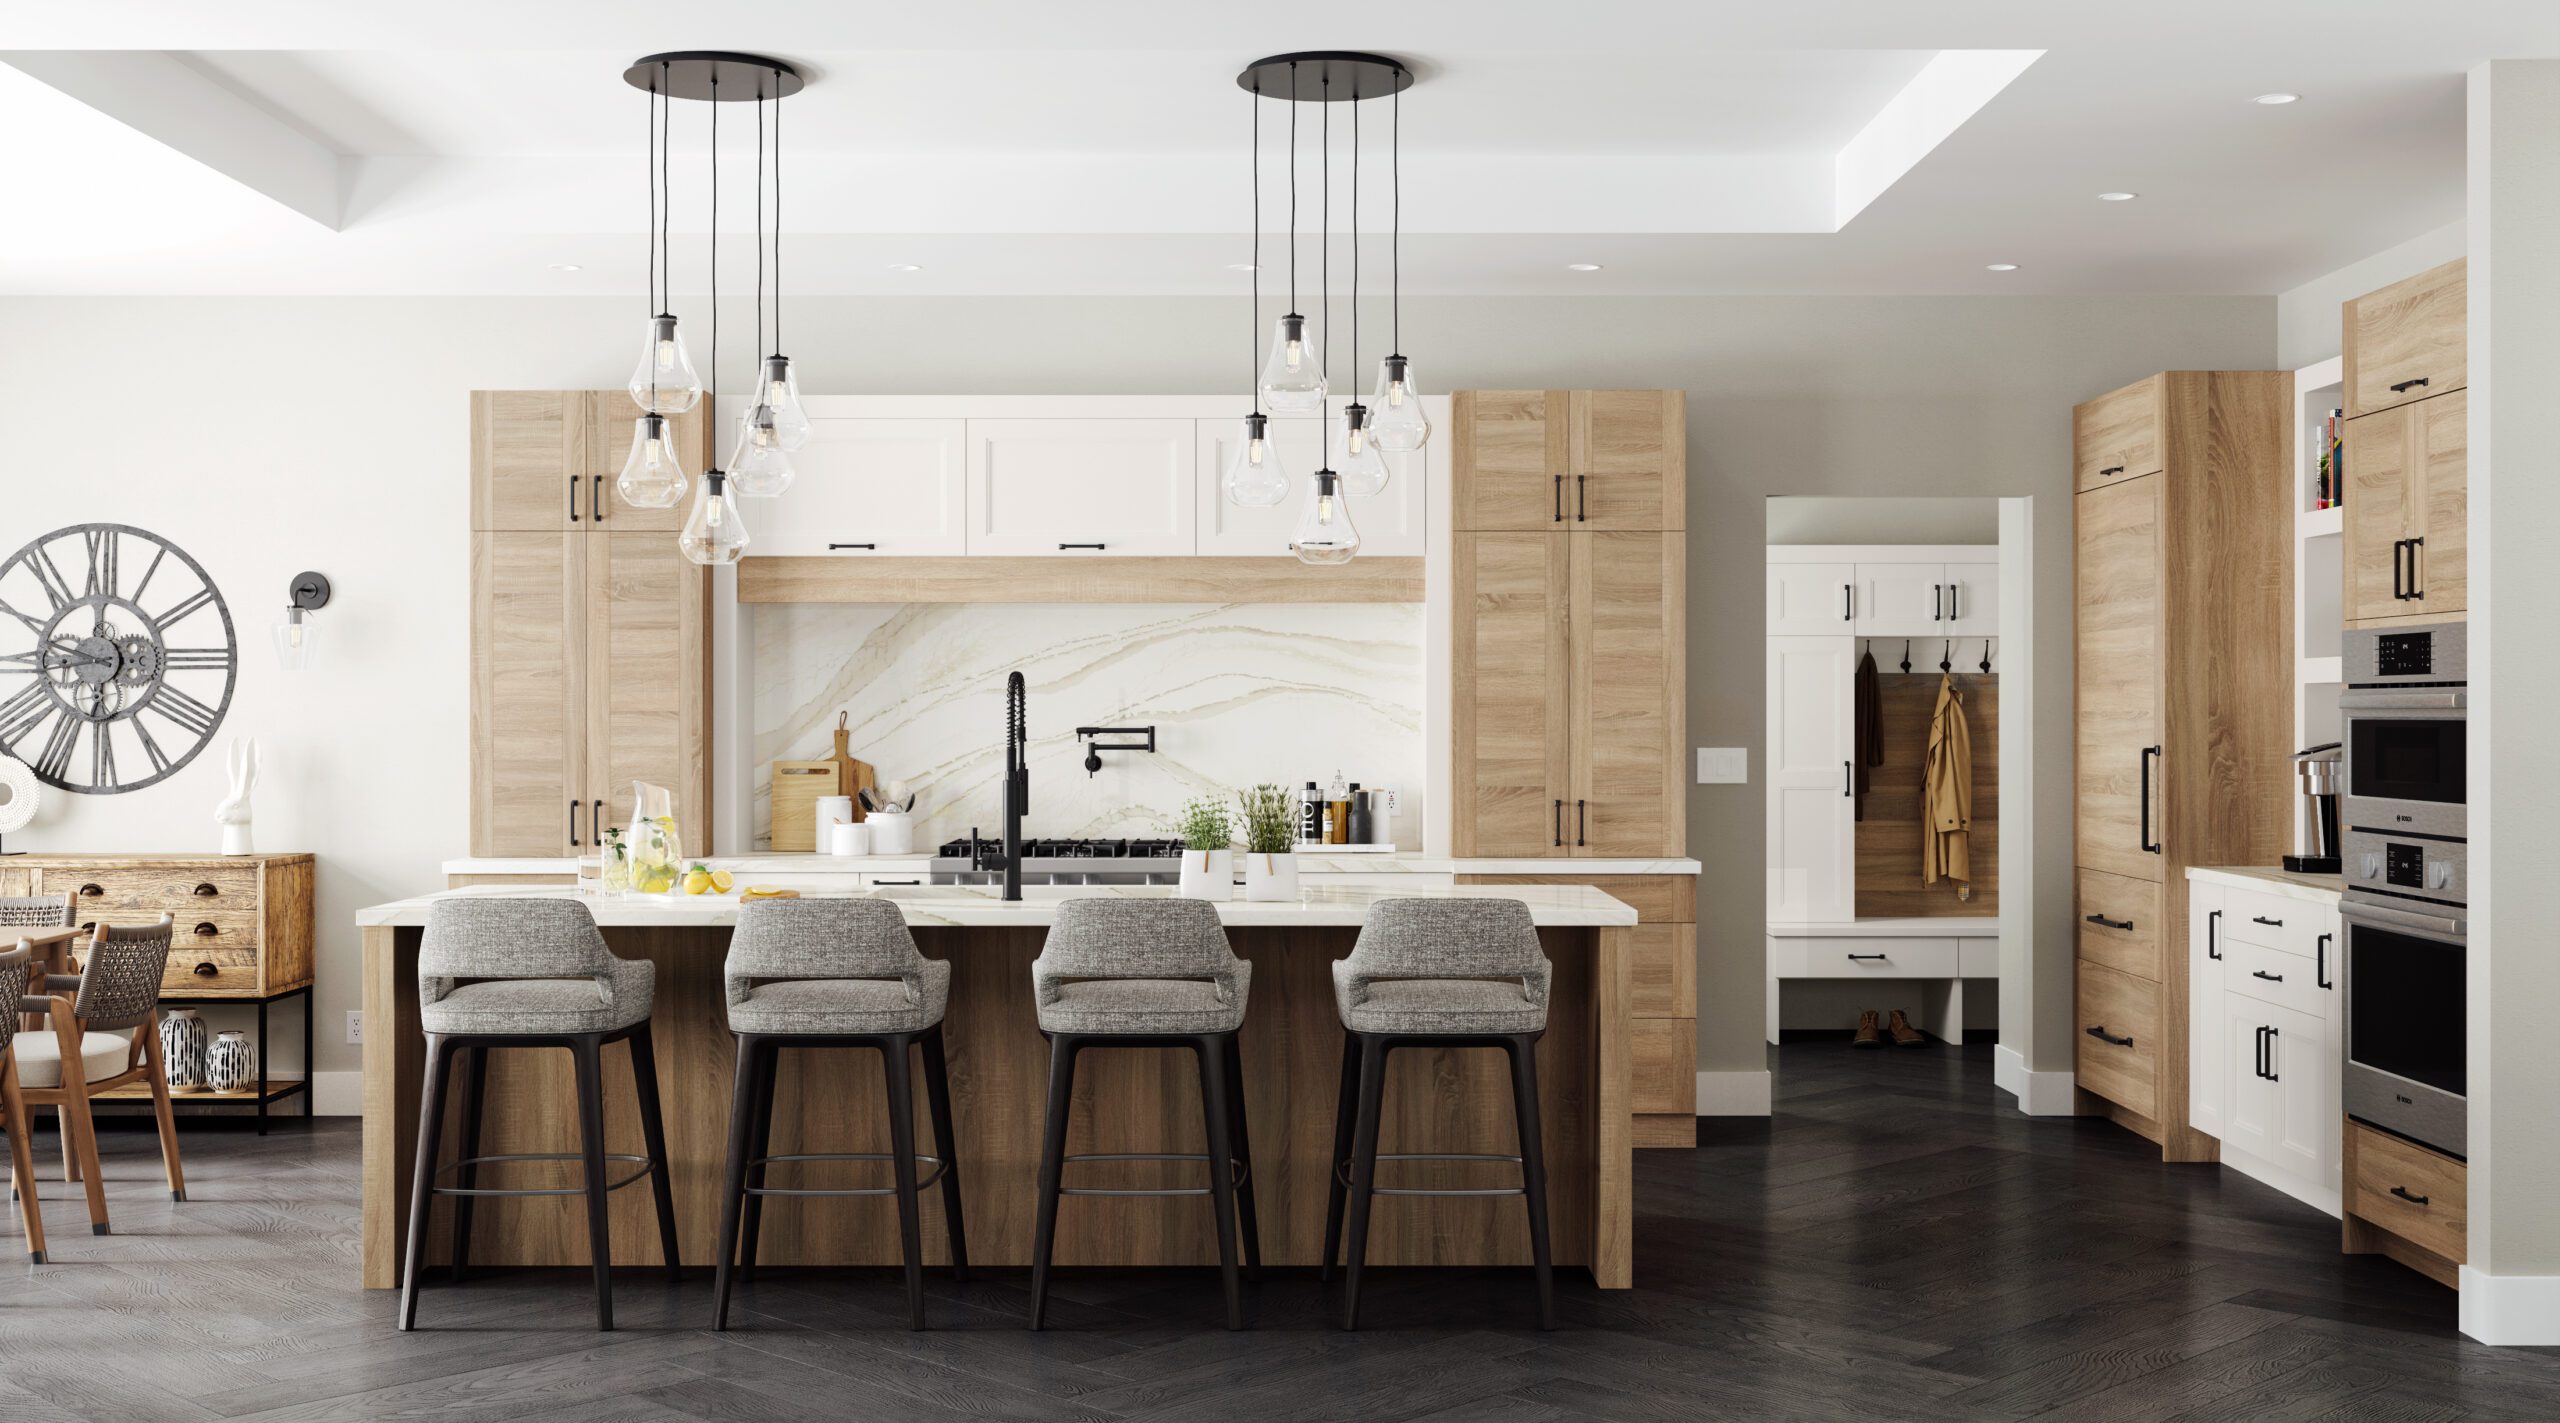 A scandi style kitchen with American made cabinets from Dura Supreme Cabinetry.